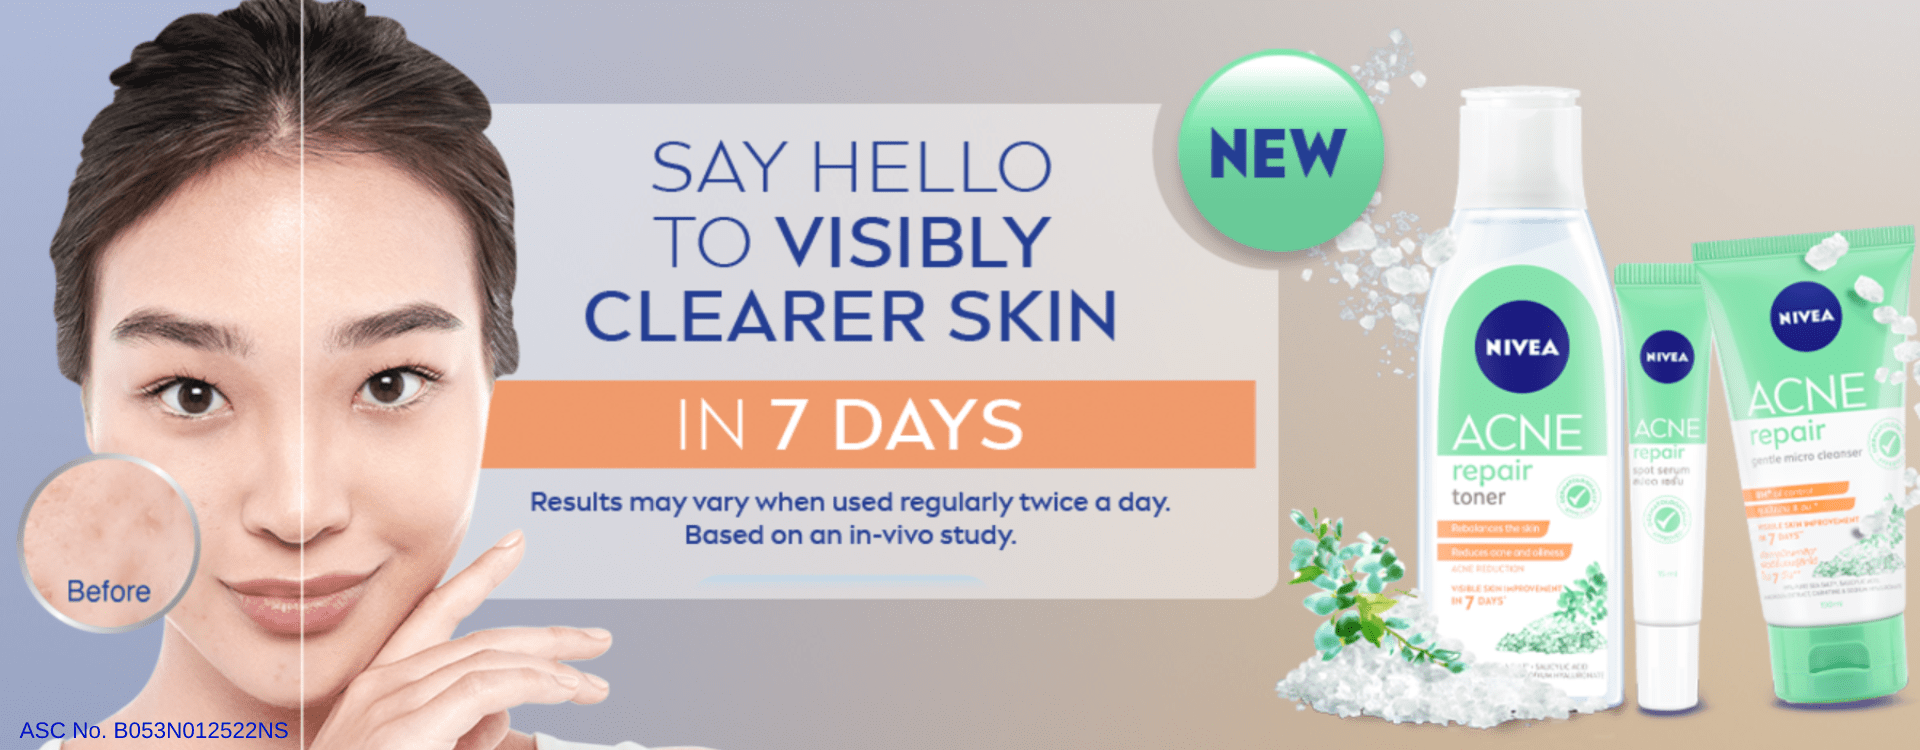 Get Visibly Clearer Skin in 7 days with NEW NIVEA Acne Repair